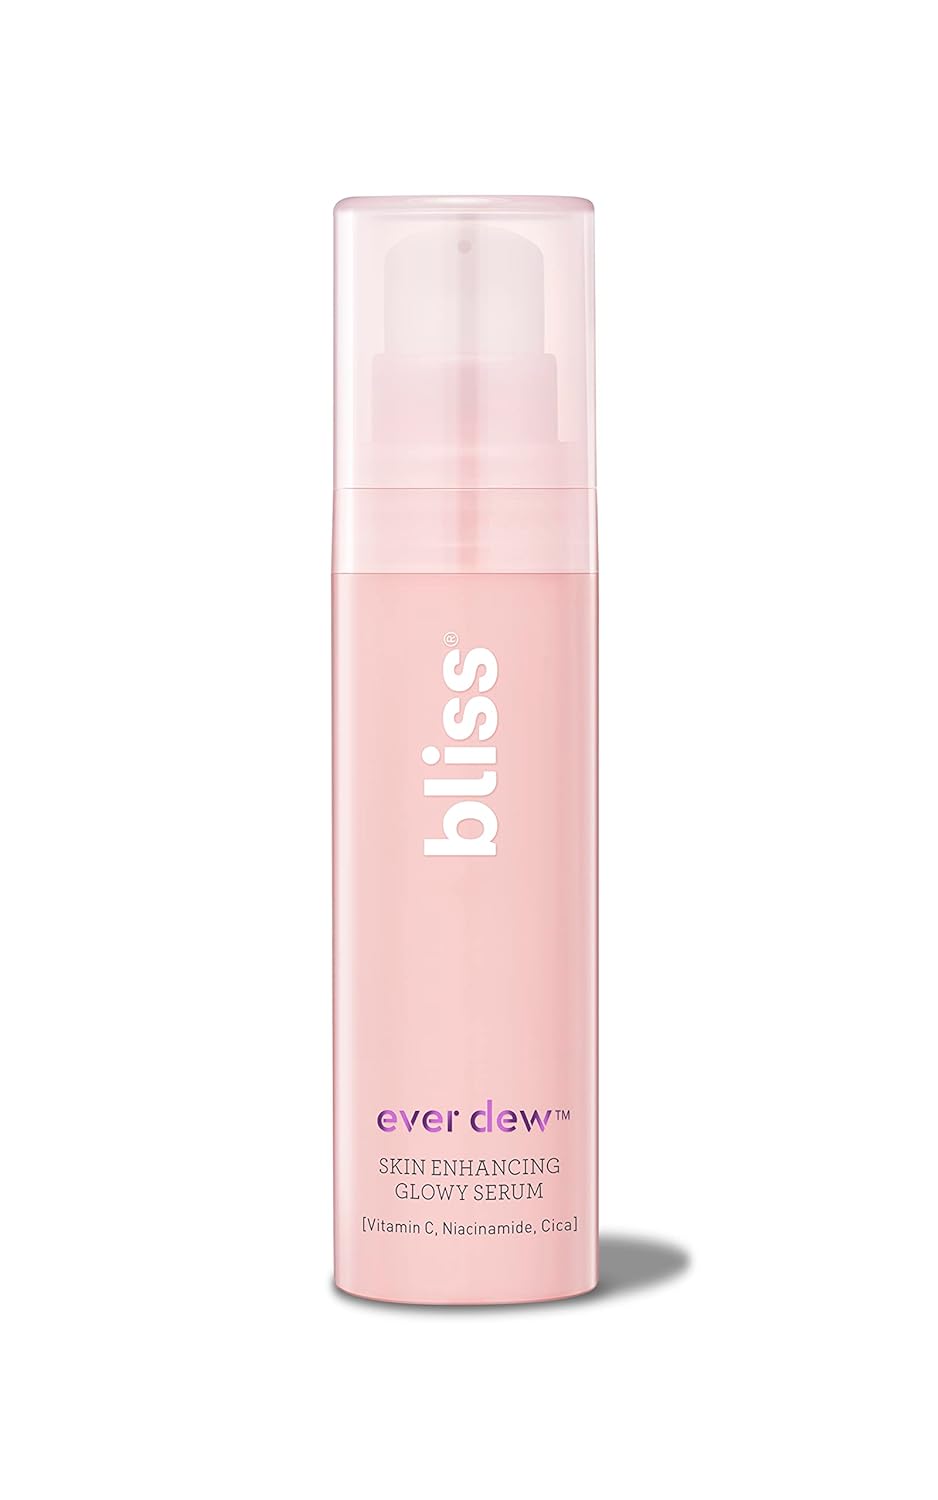 Bliss Ever Dew Skin Enhancing Glowing Serum | Radiance Booster, Primer and Liquid Highlighter : Beauty & Personal Care